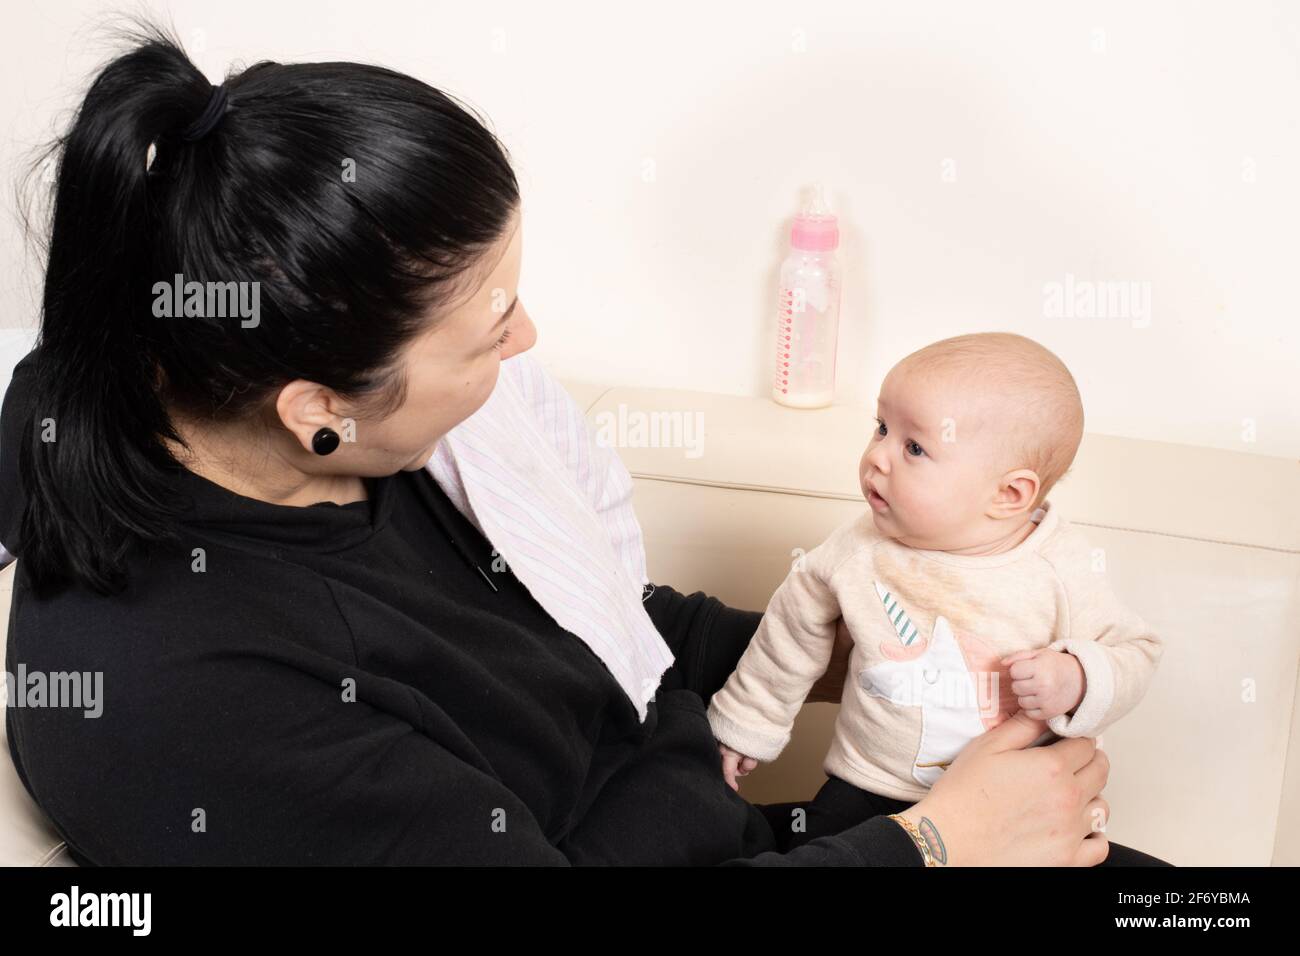 Two month old baby girl held by mother, looking attentively at her as she talks and smilies Stock Photo